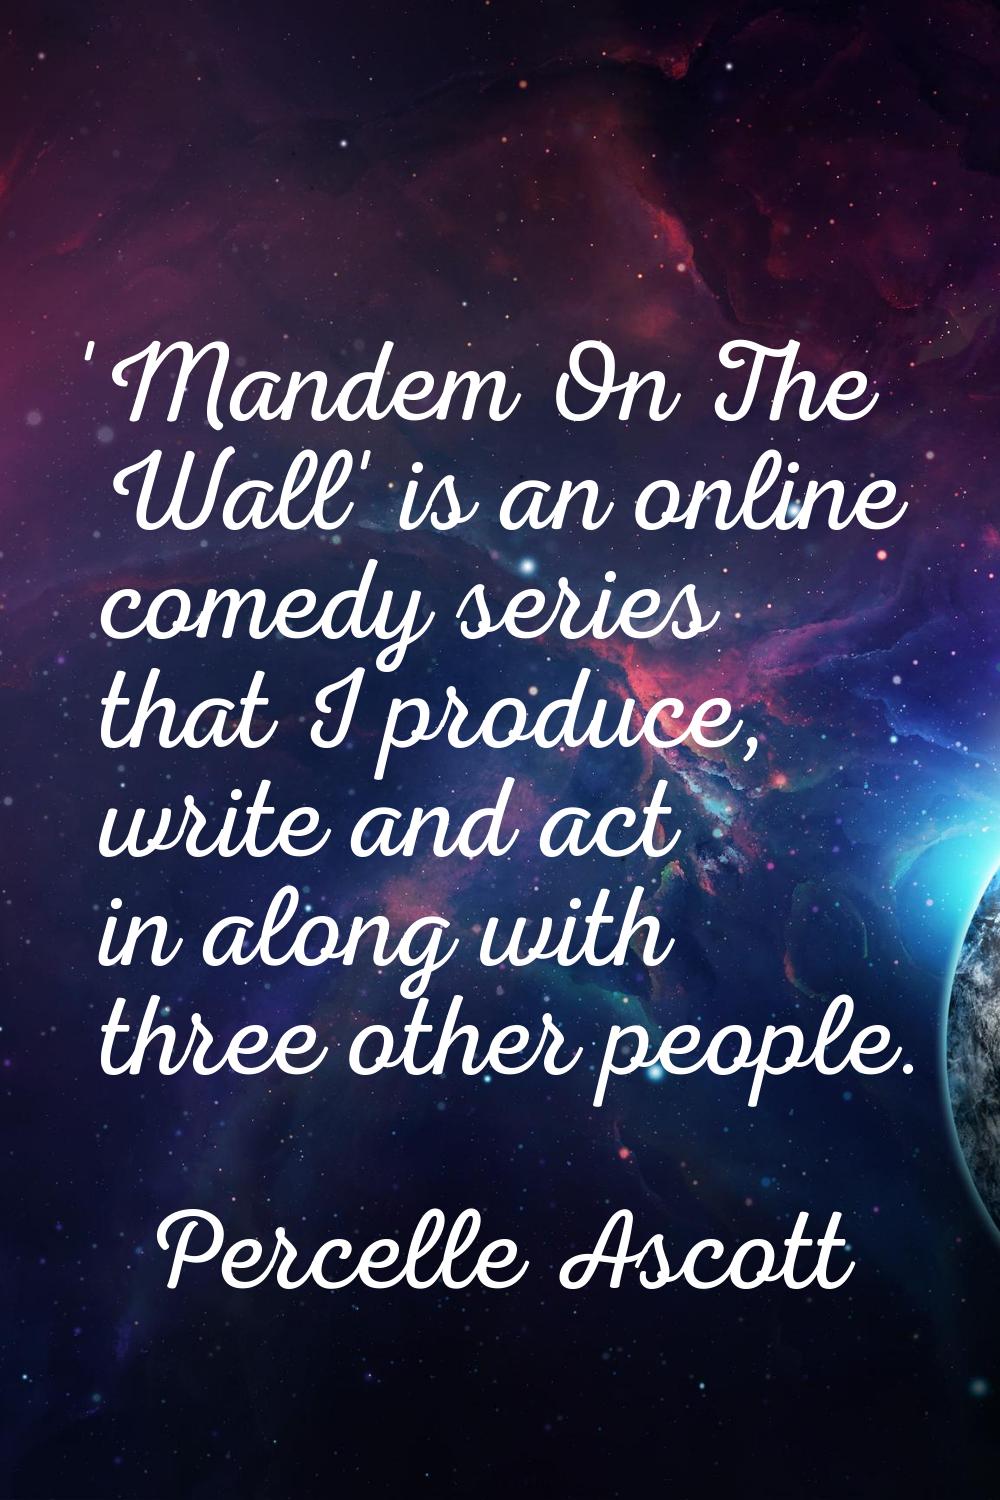 'Mandem On The Wall' is an online comedy series that I produce, write and act in along with three o